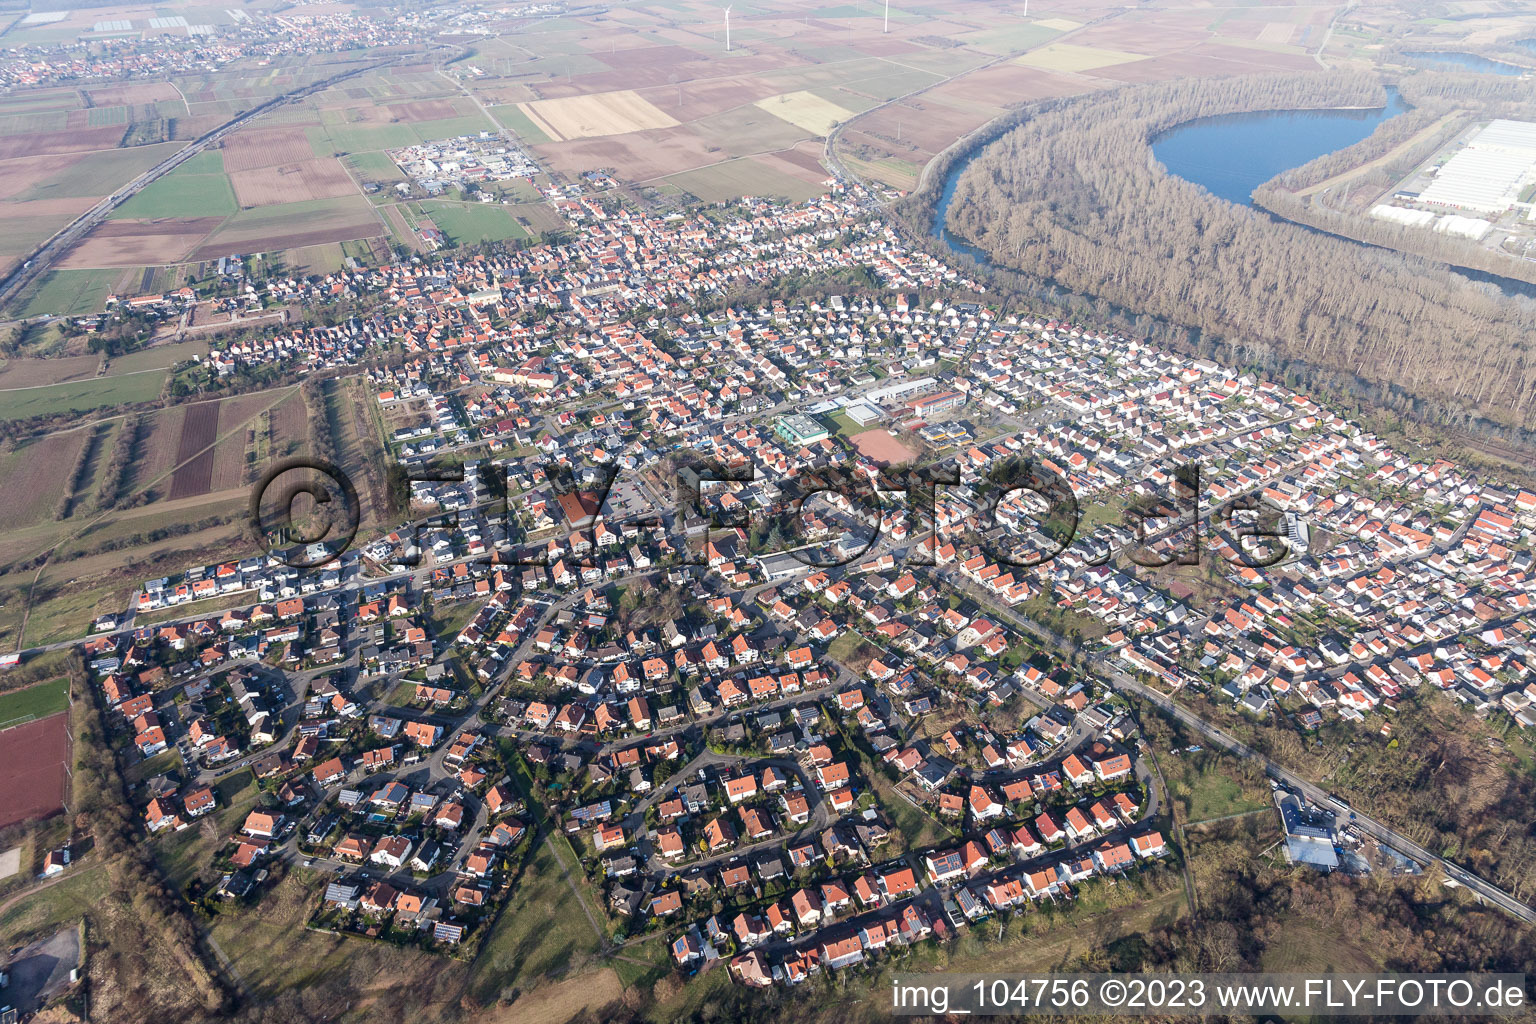 Drone image of Lingenfeld in the state Rhineland-Palatinate, Germany